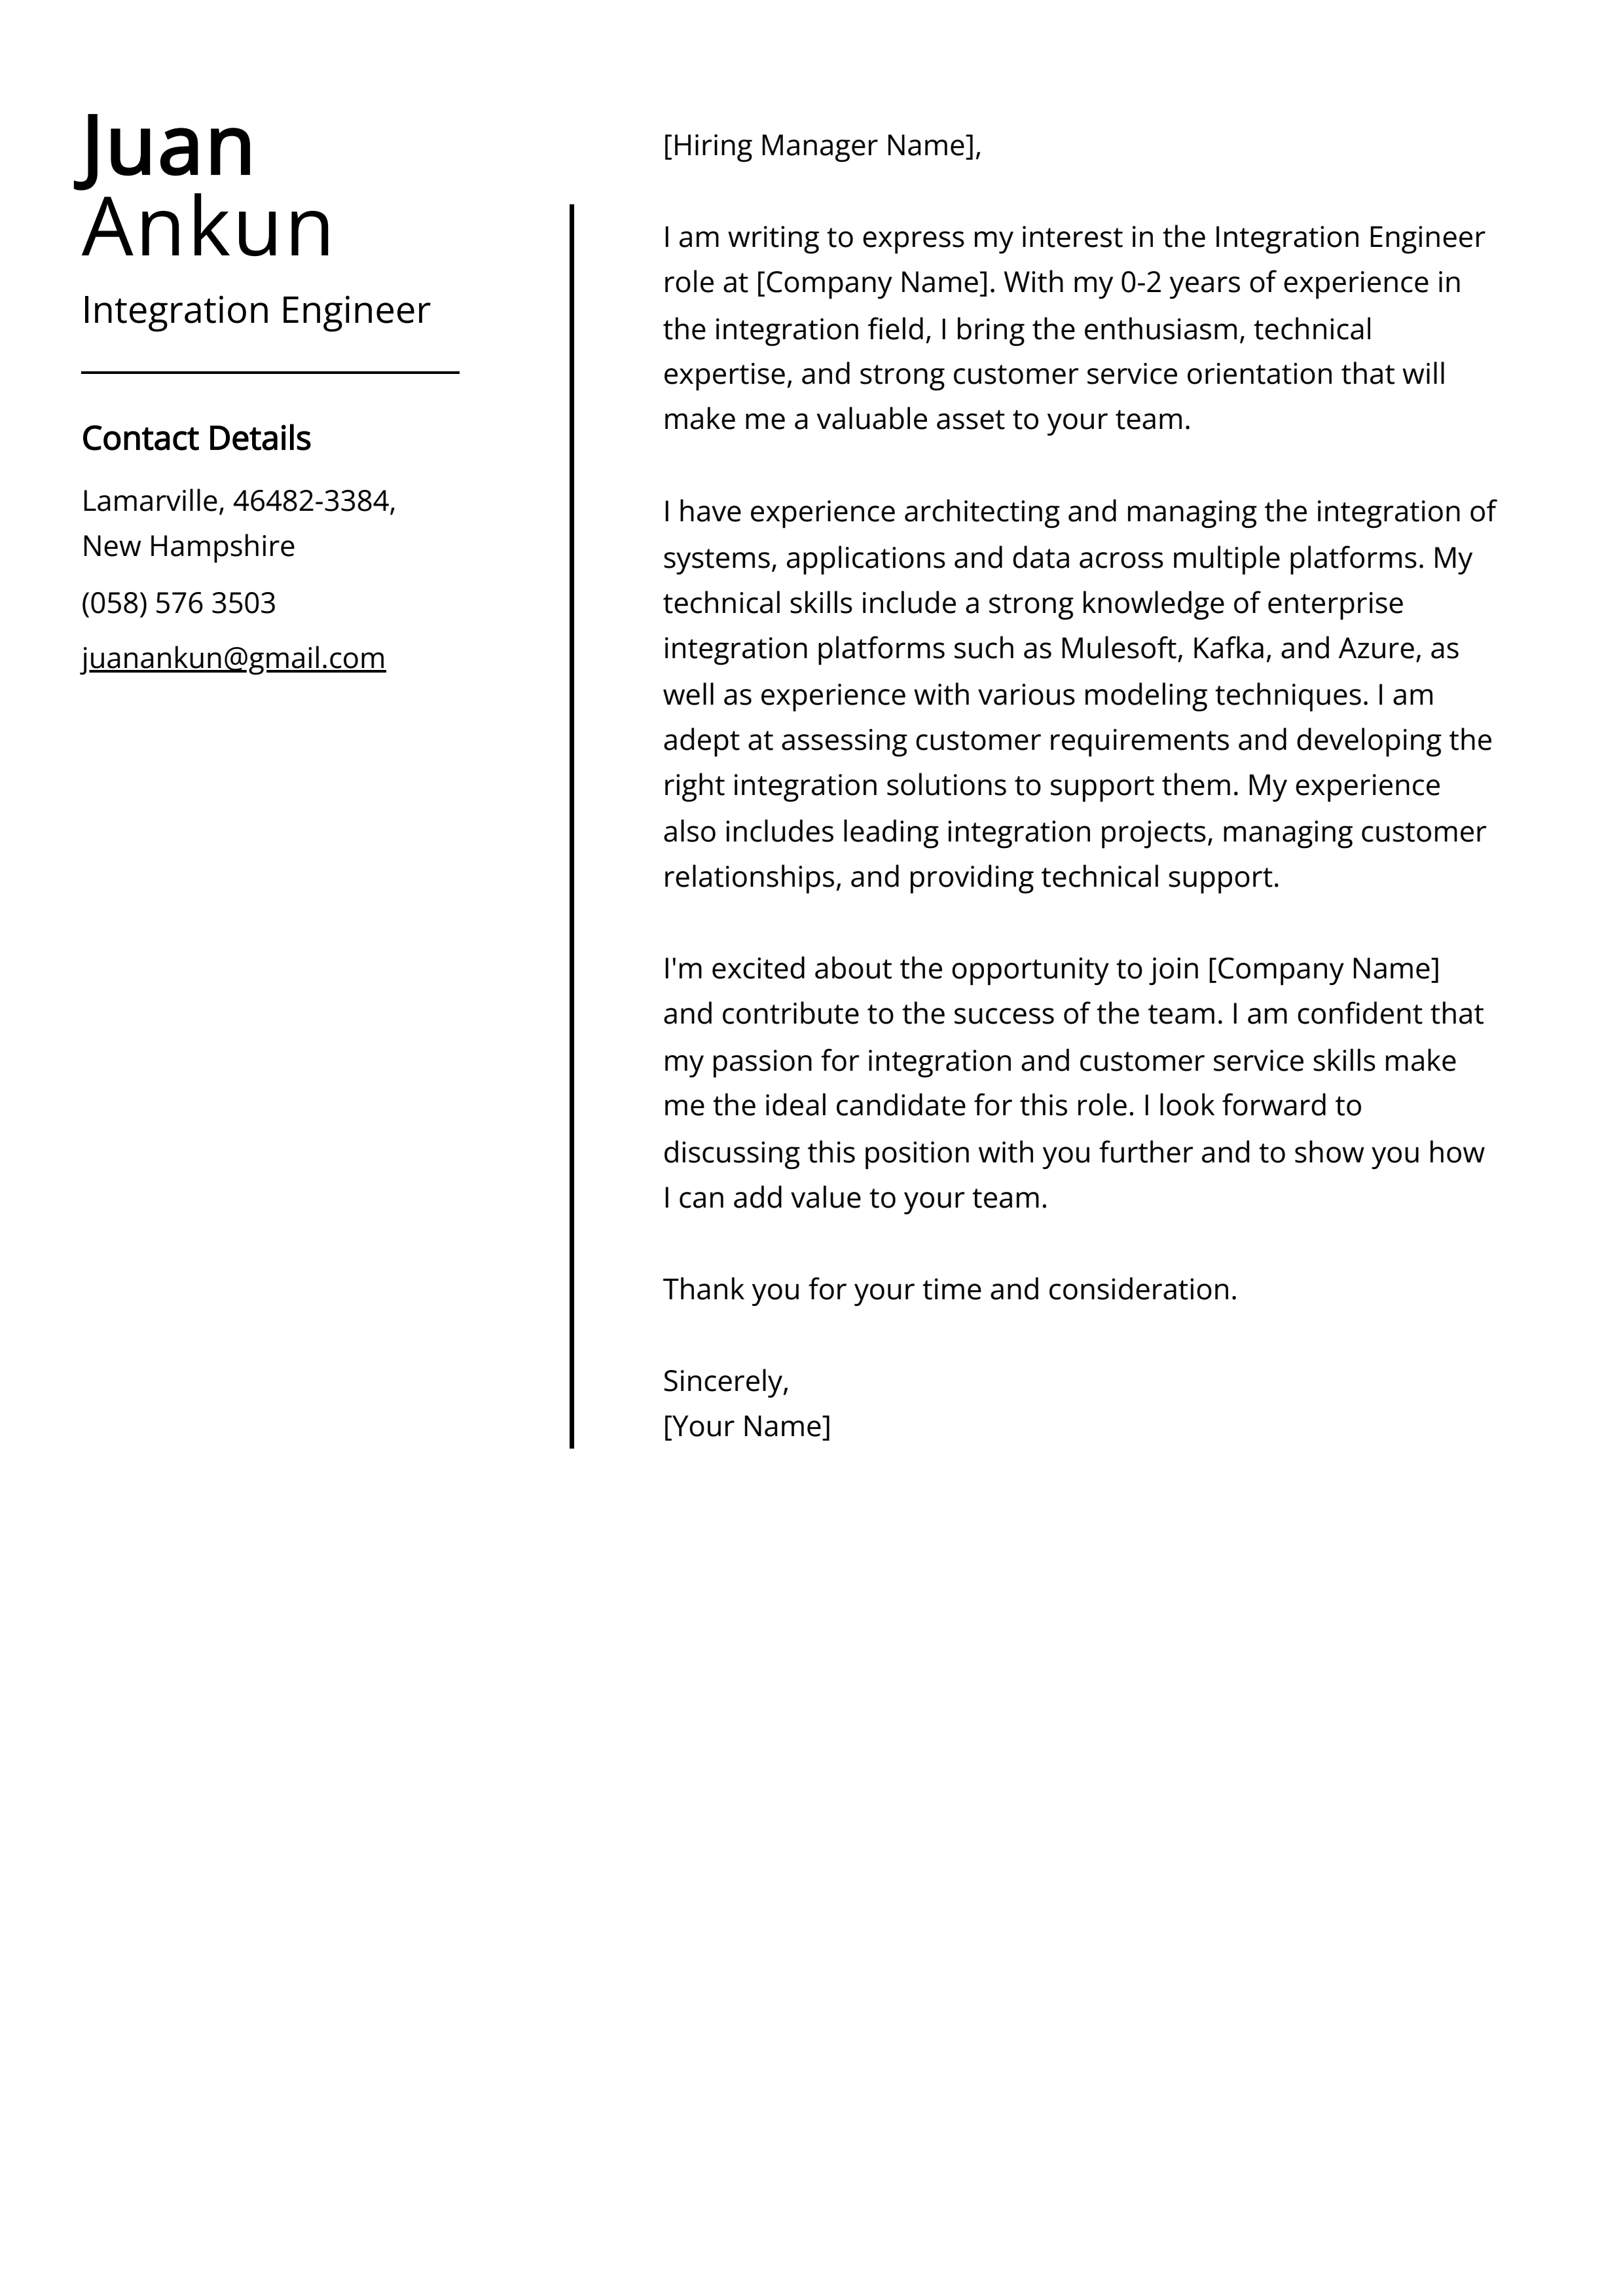 Integration Engineer Cover Letter Example